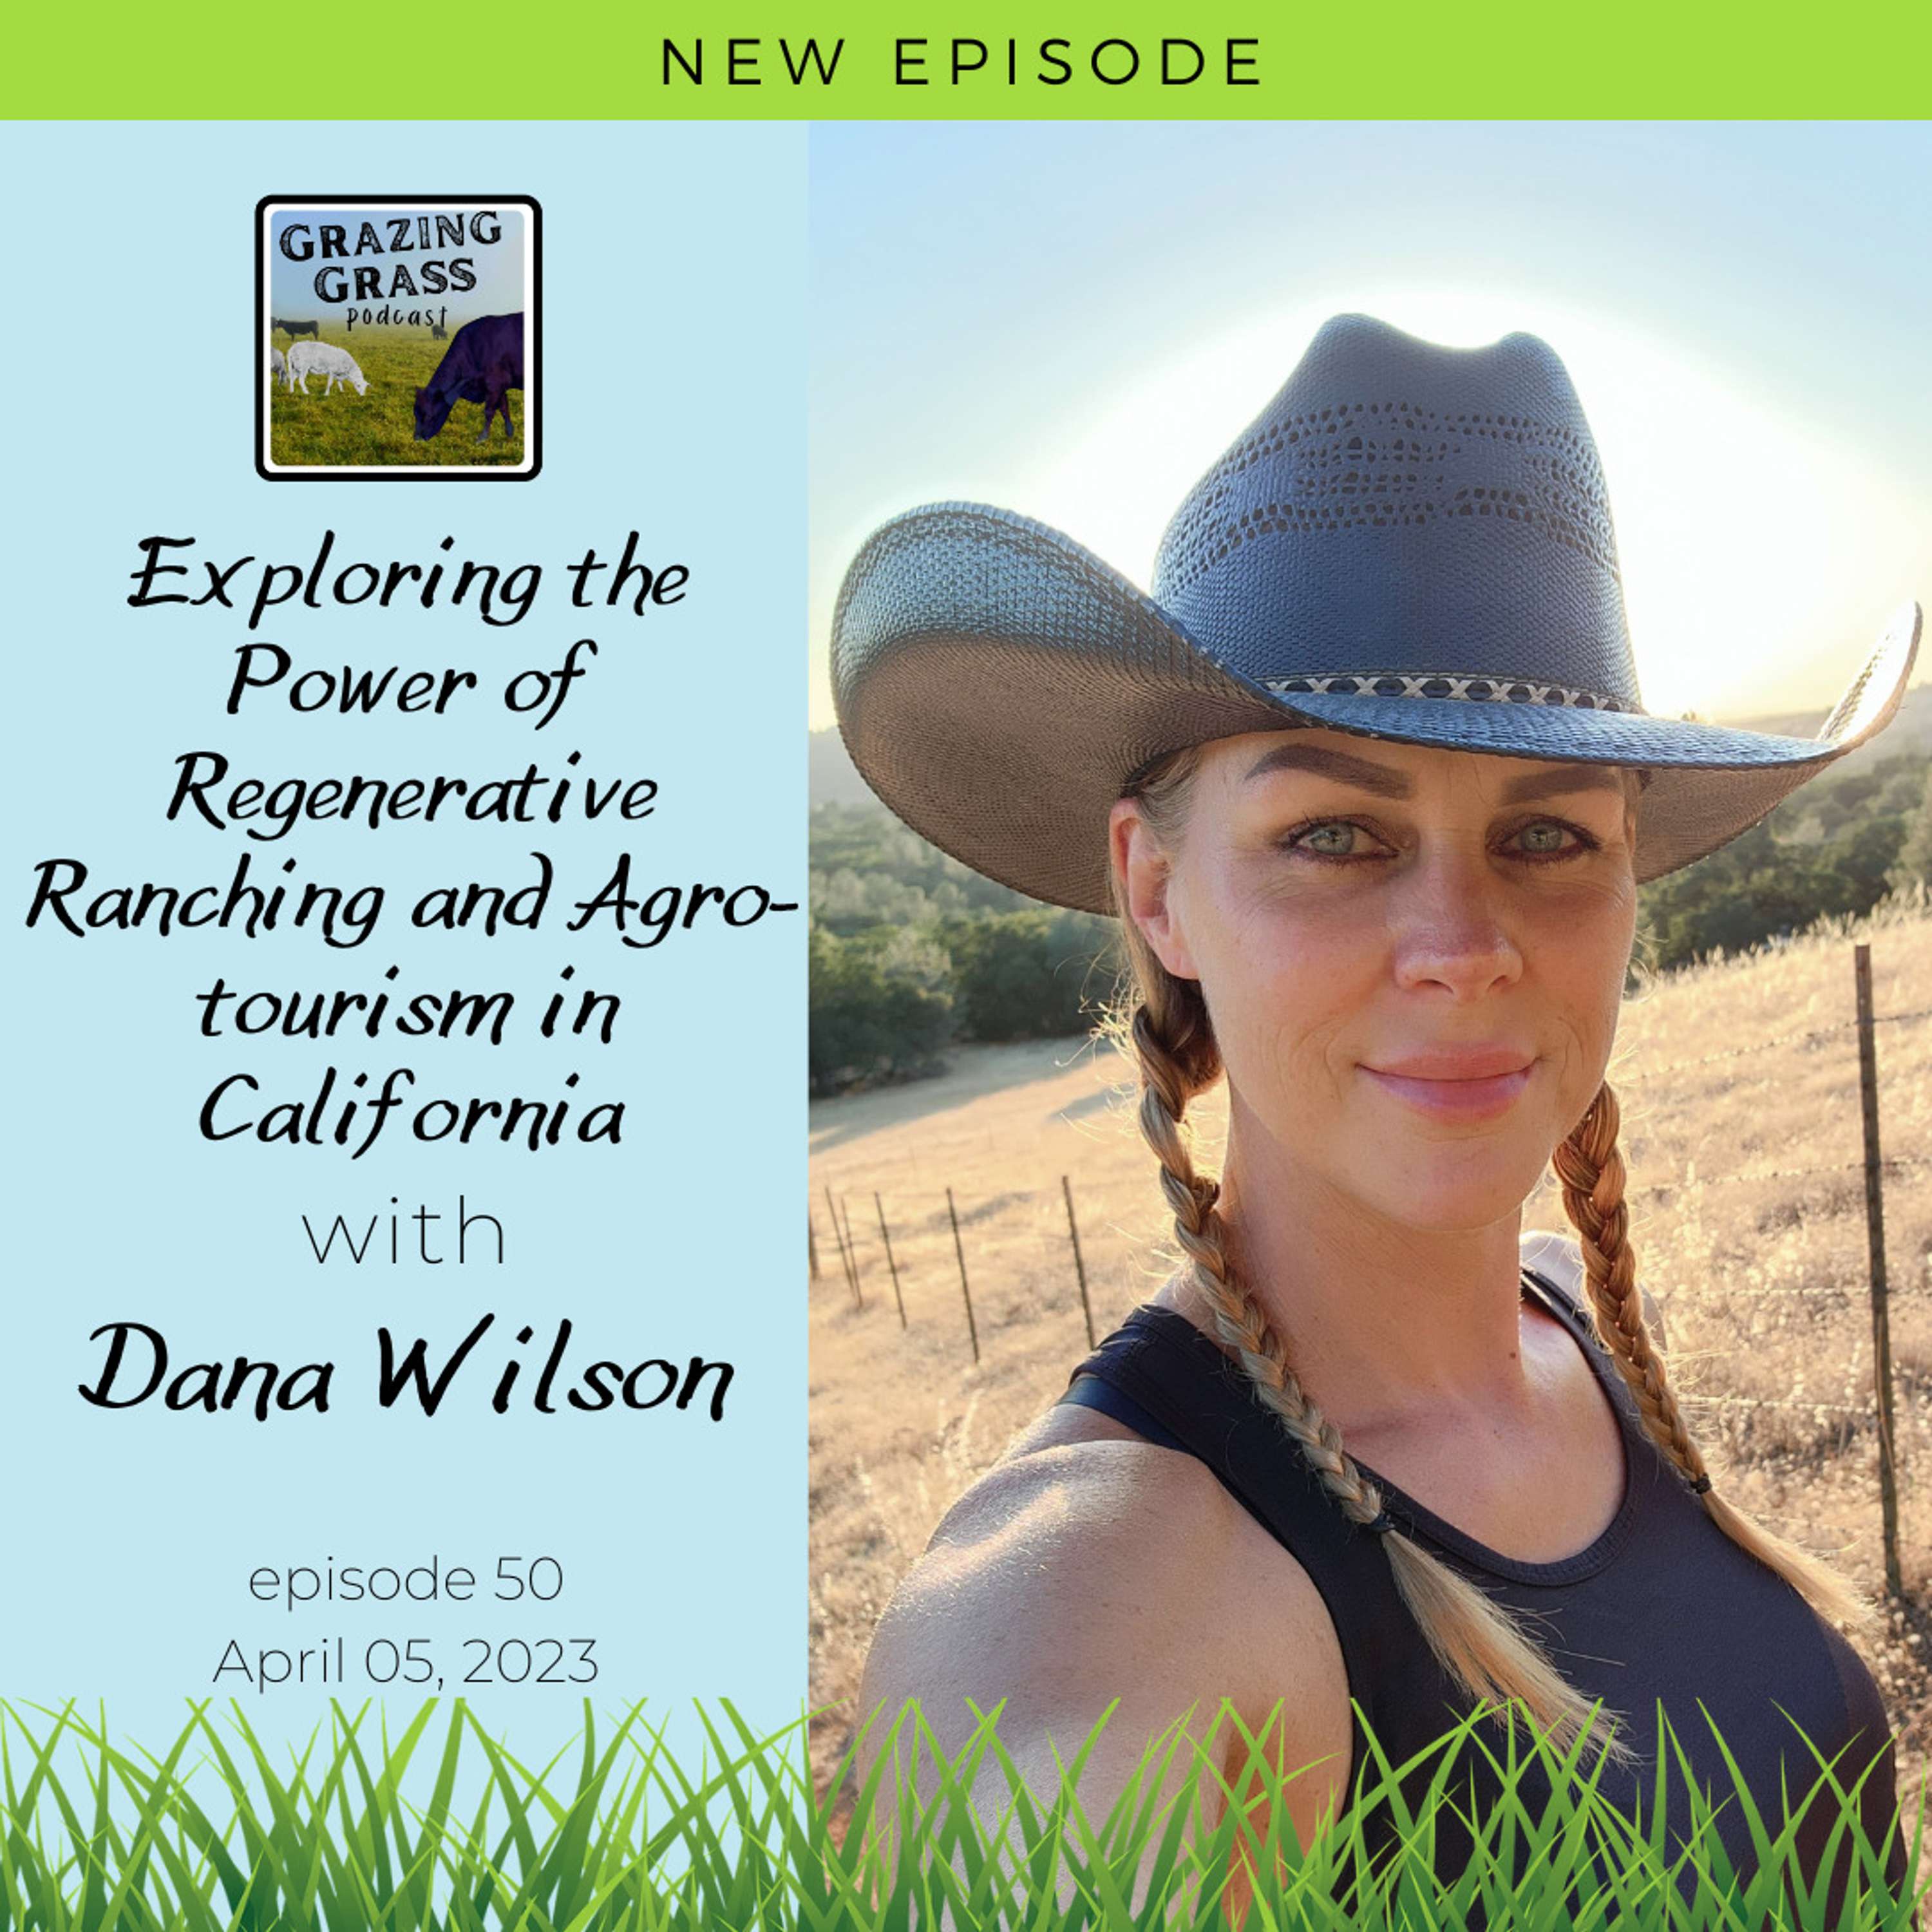 e50. Exploring the Power of Regenerative Ranching and Agro-tourism in California with Dana Wilson